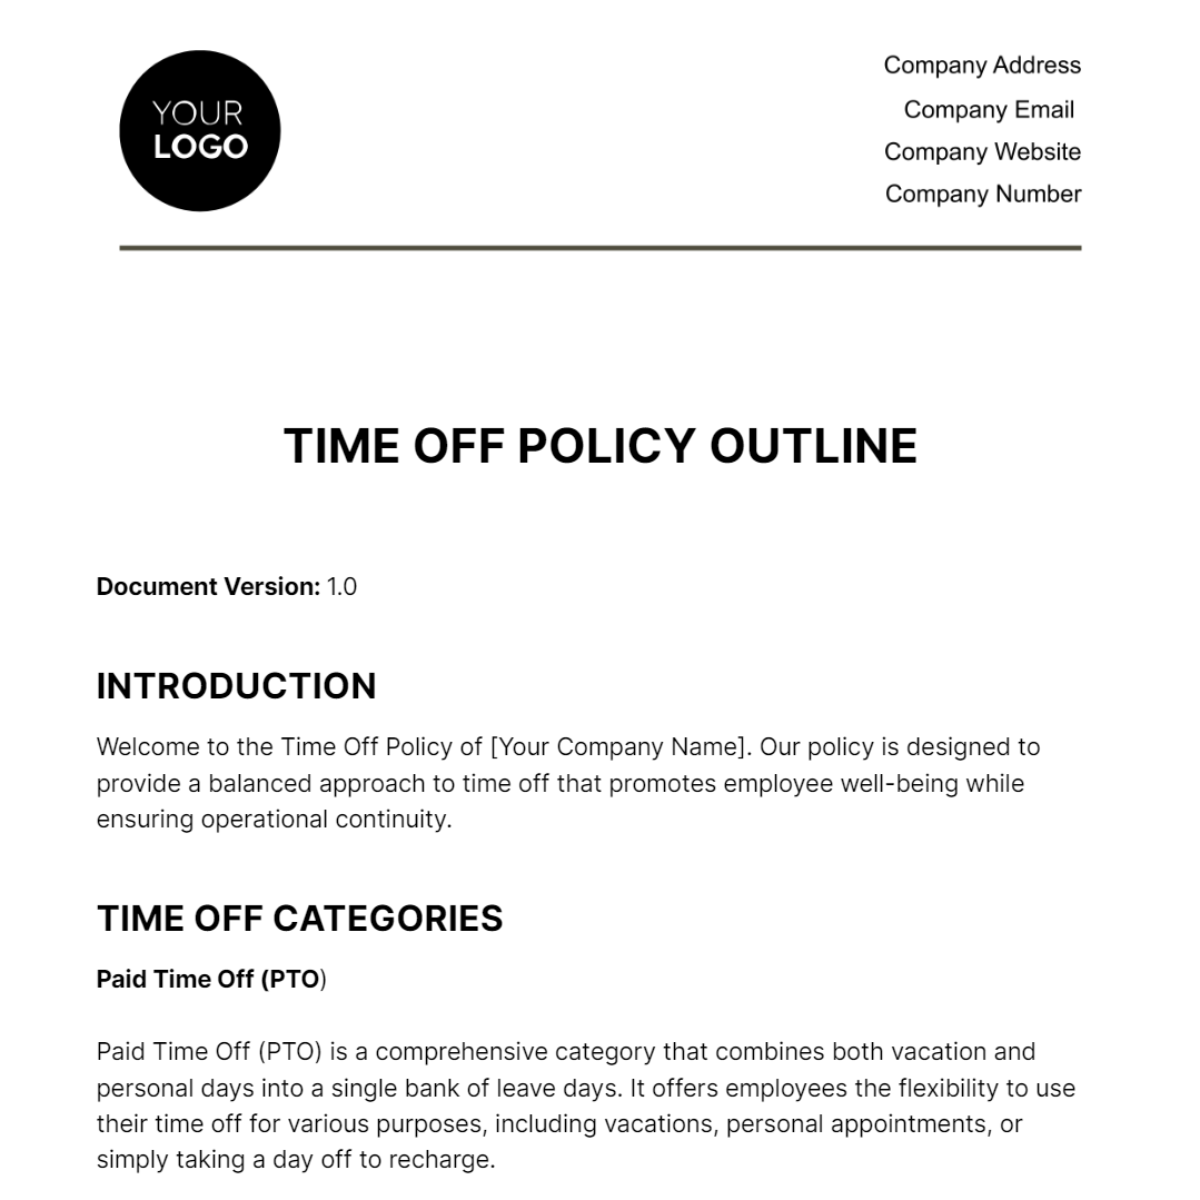 Free Time-Off Policy Outline HR Template